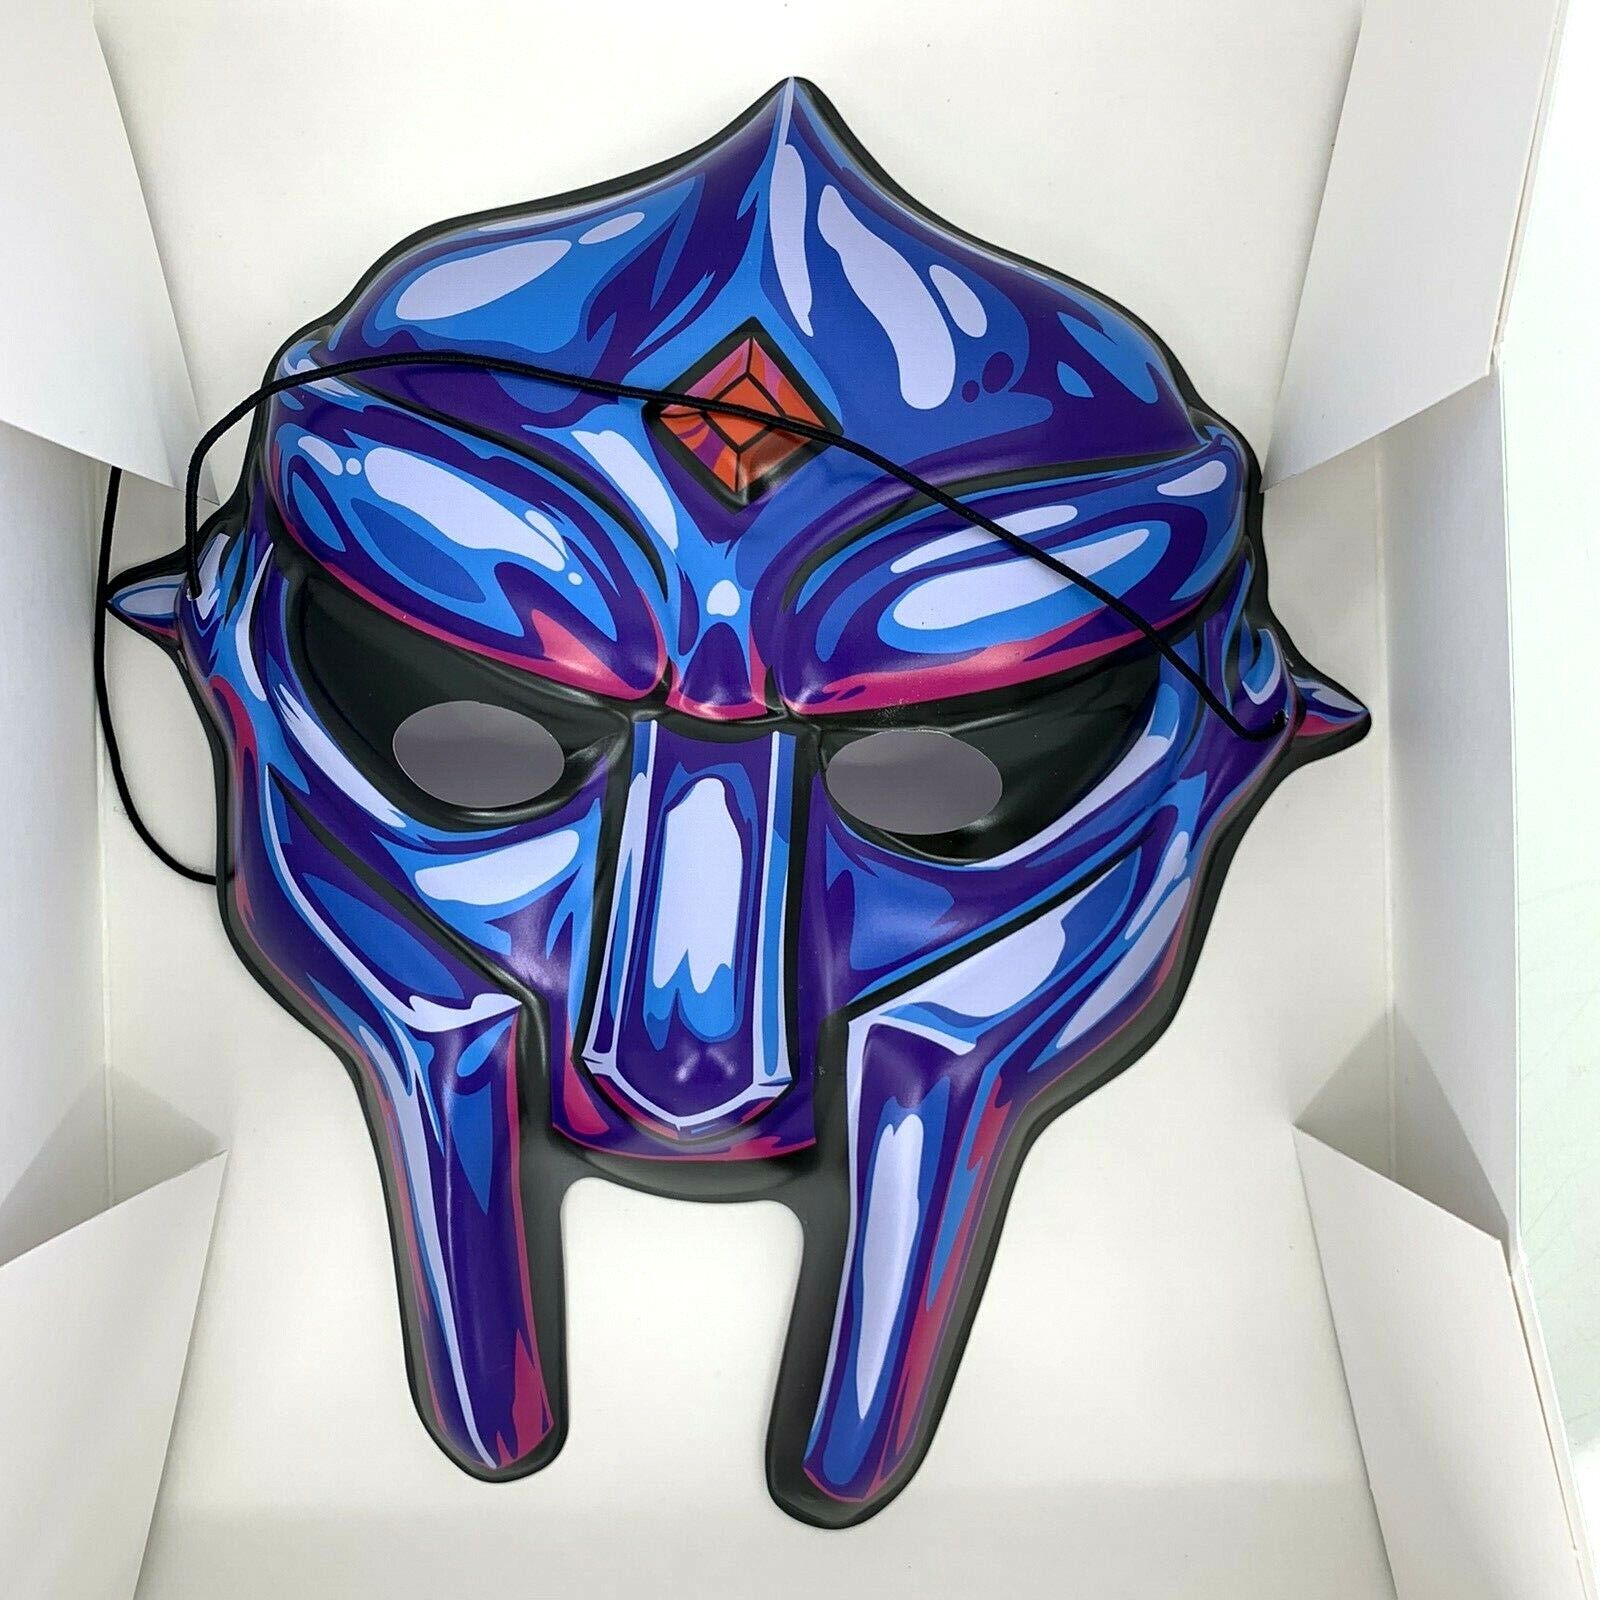 MF DOOM Limited Edition Collectible Mask Complete Set of 4 Sold out Rhymesayers Без бренда - фотография #8